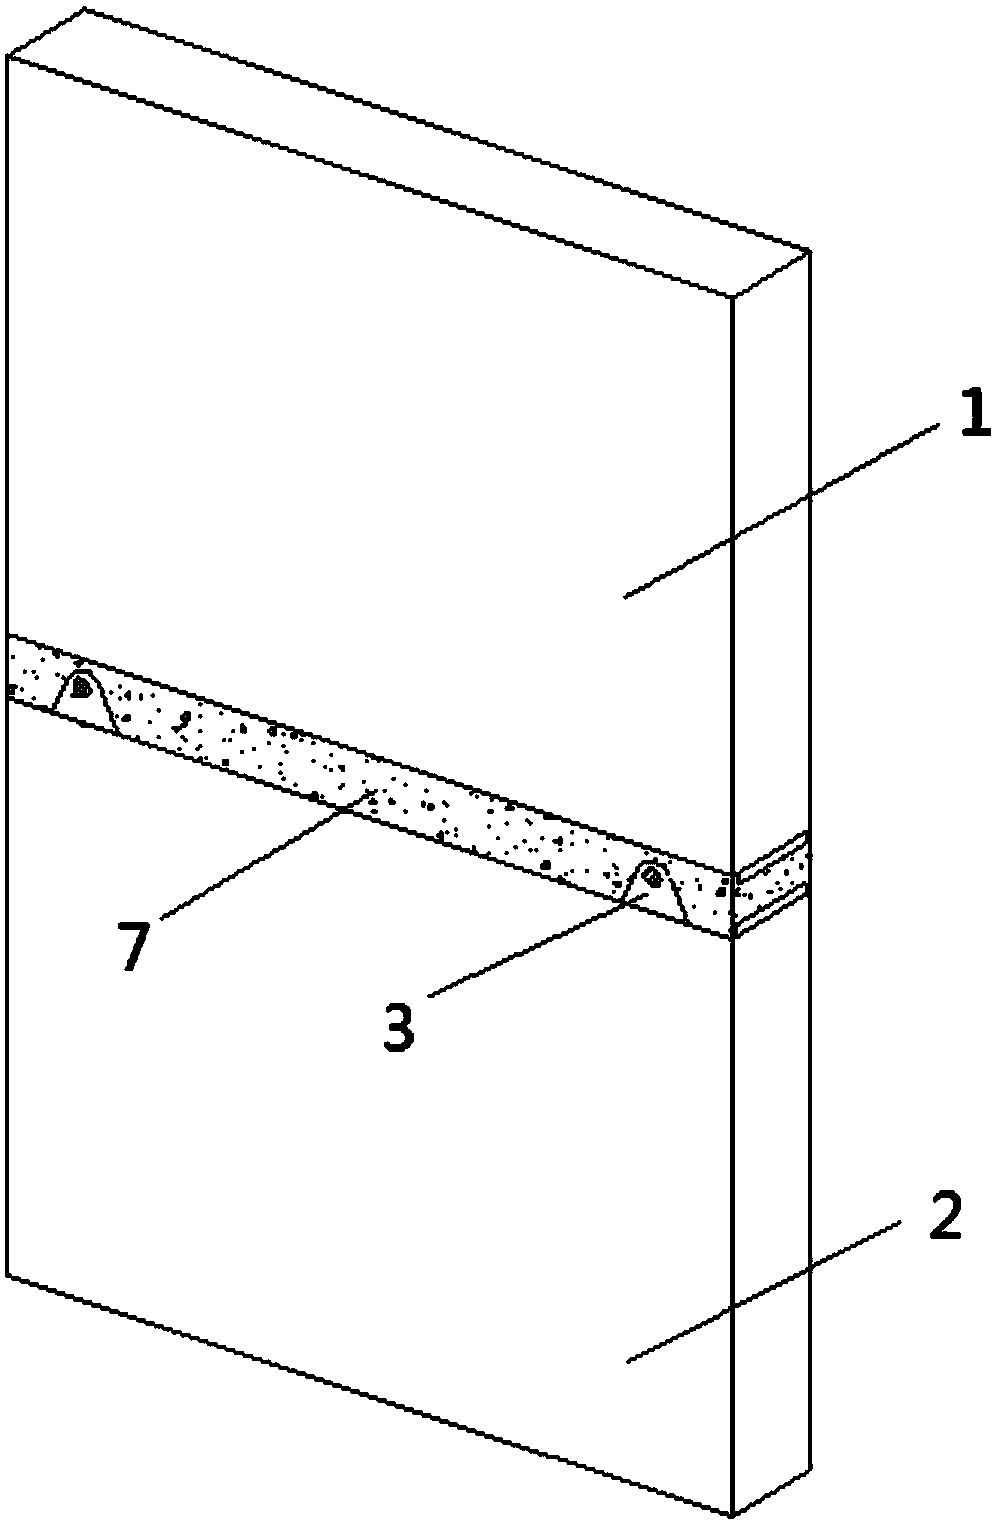 Vertical multi-hinge connection structure between assembled shear walls and construction method